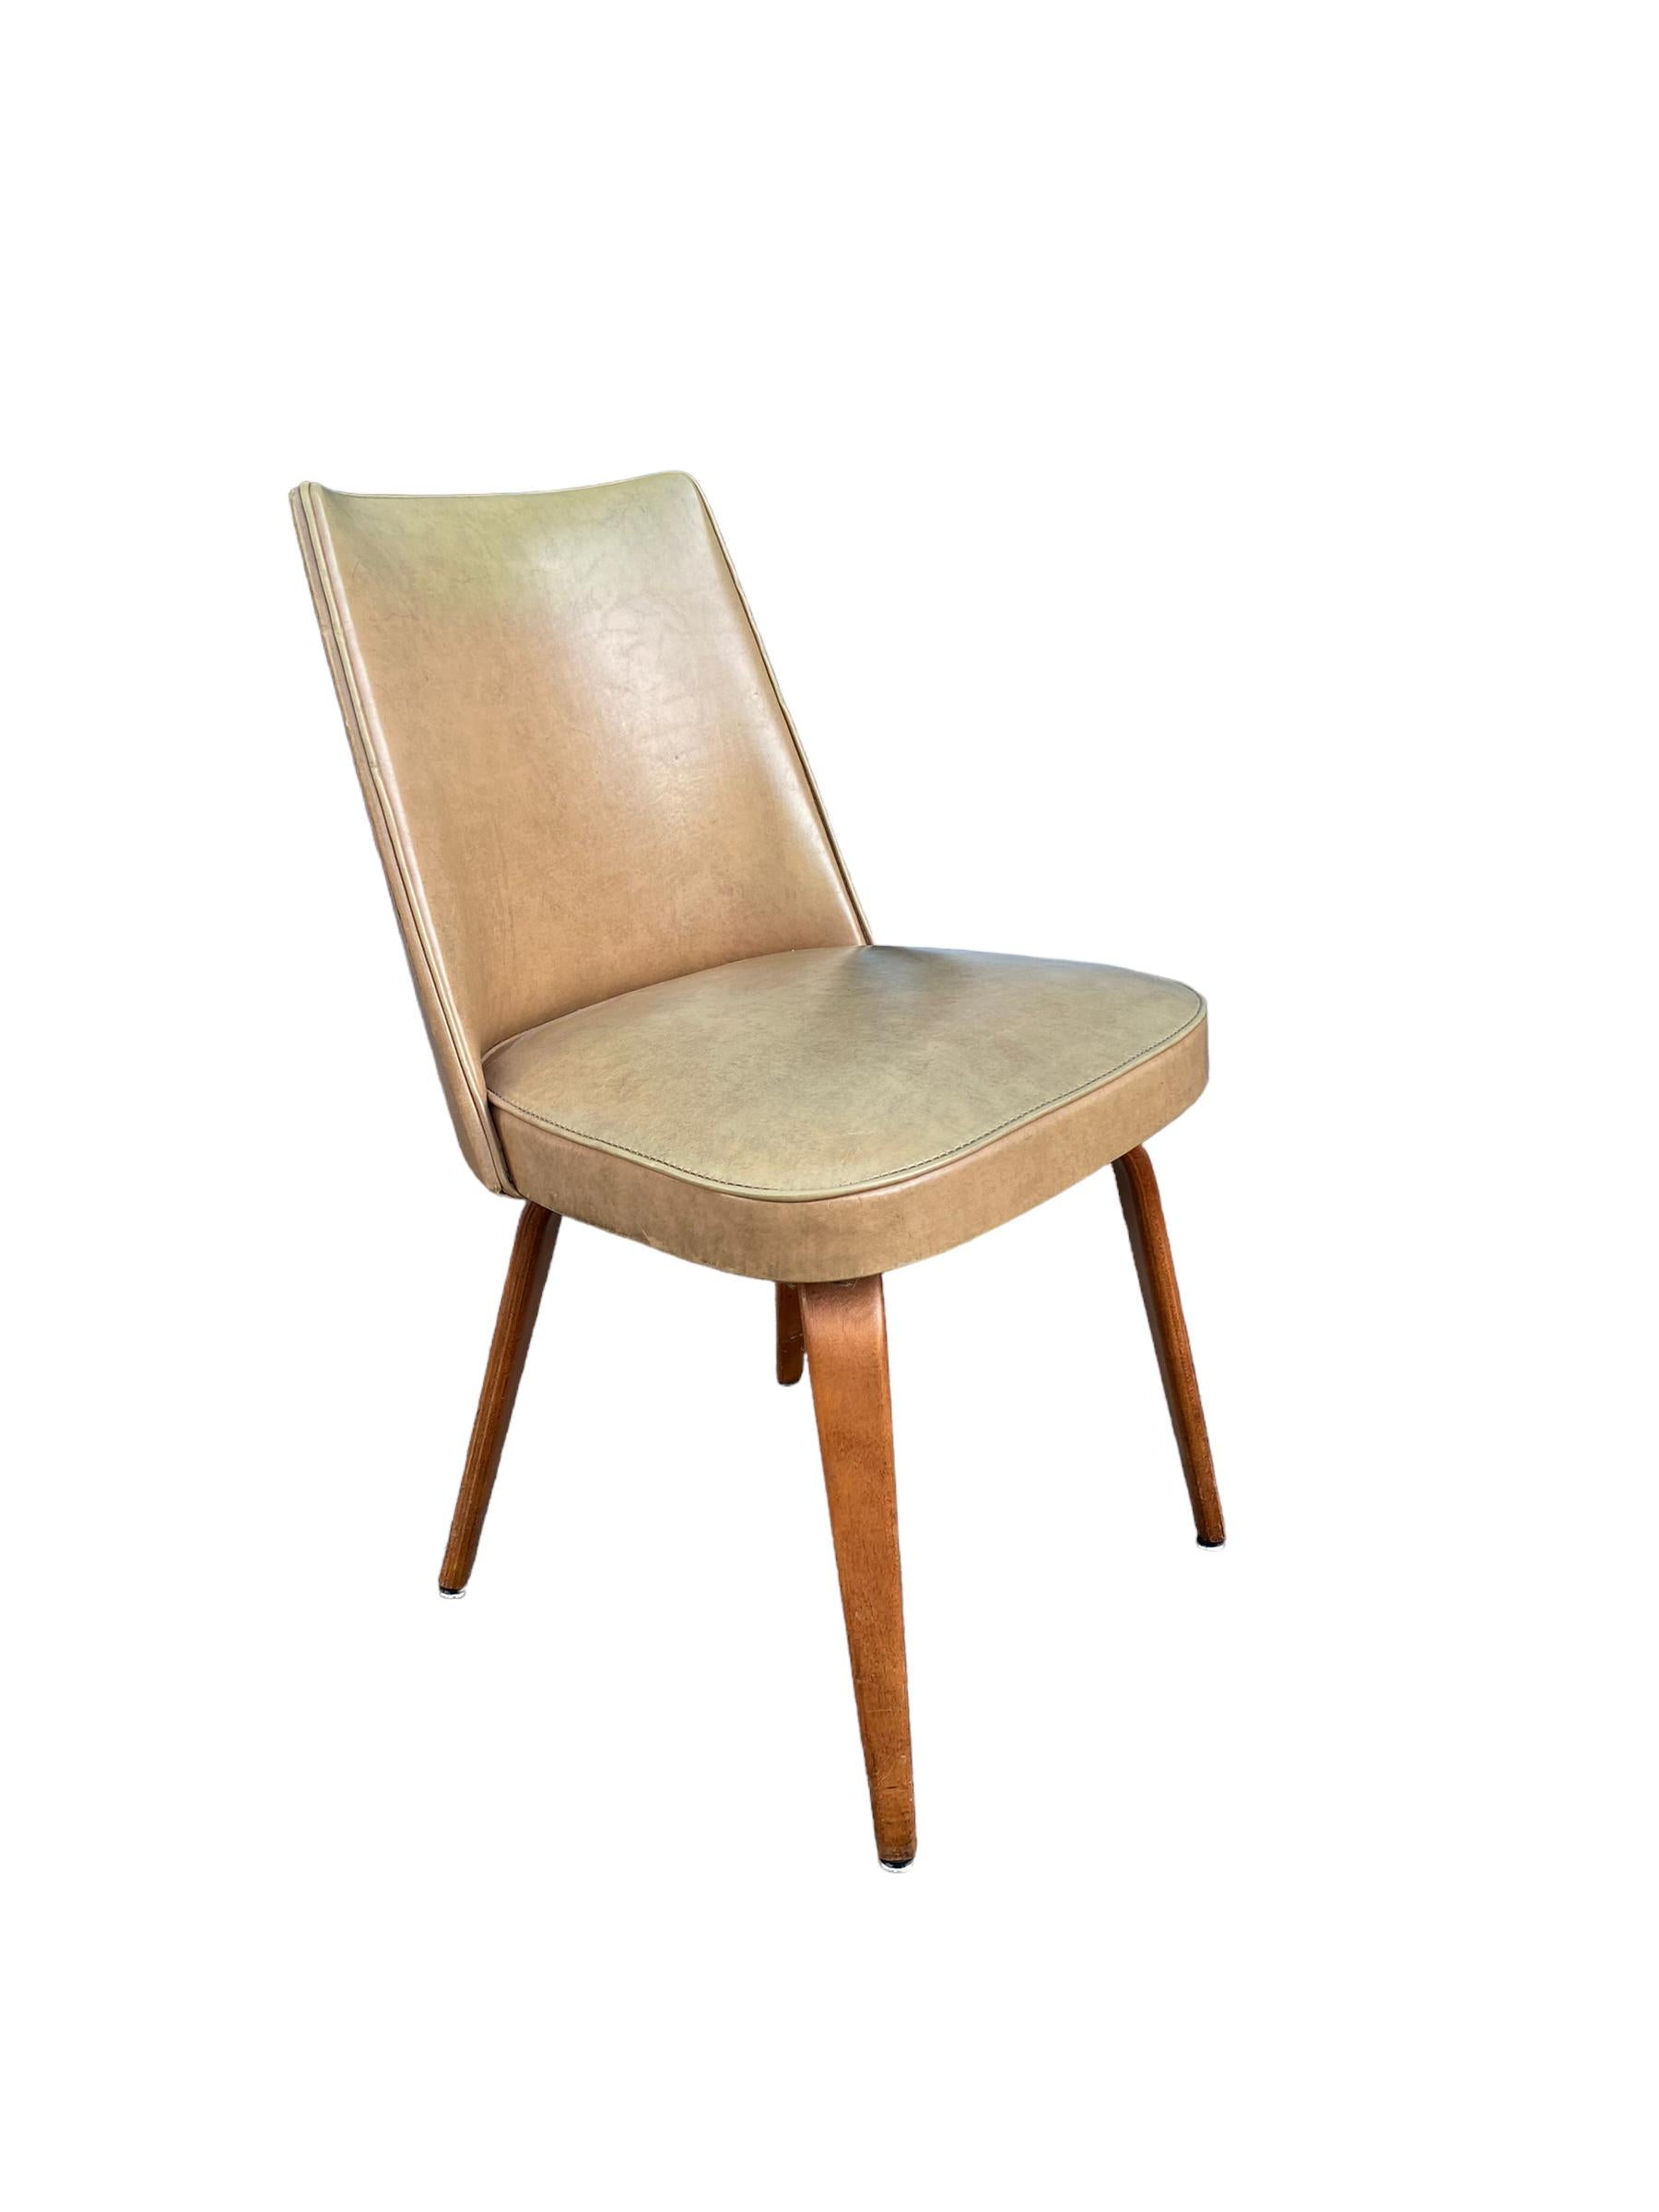 Mid-Century Modern Upholstered Dining Chair by Thonet For Sale